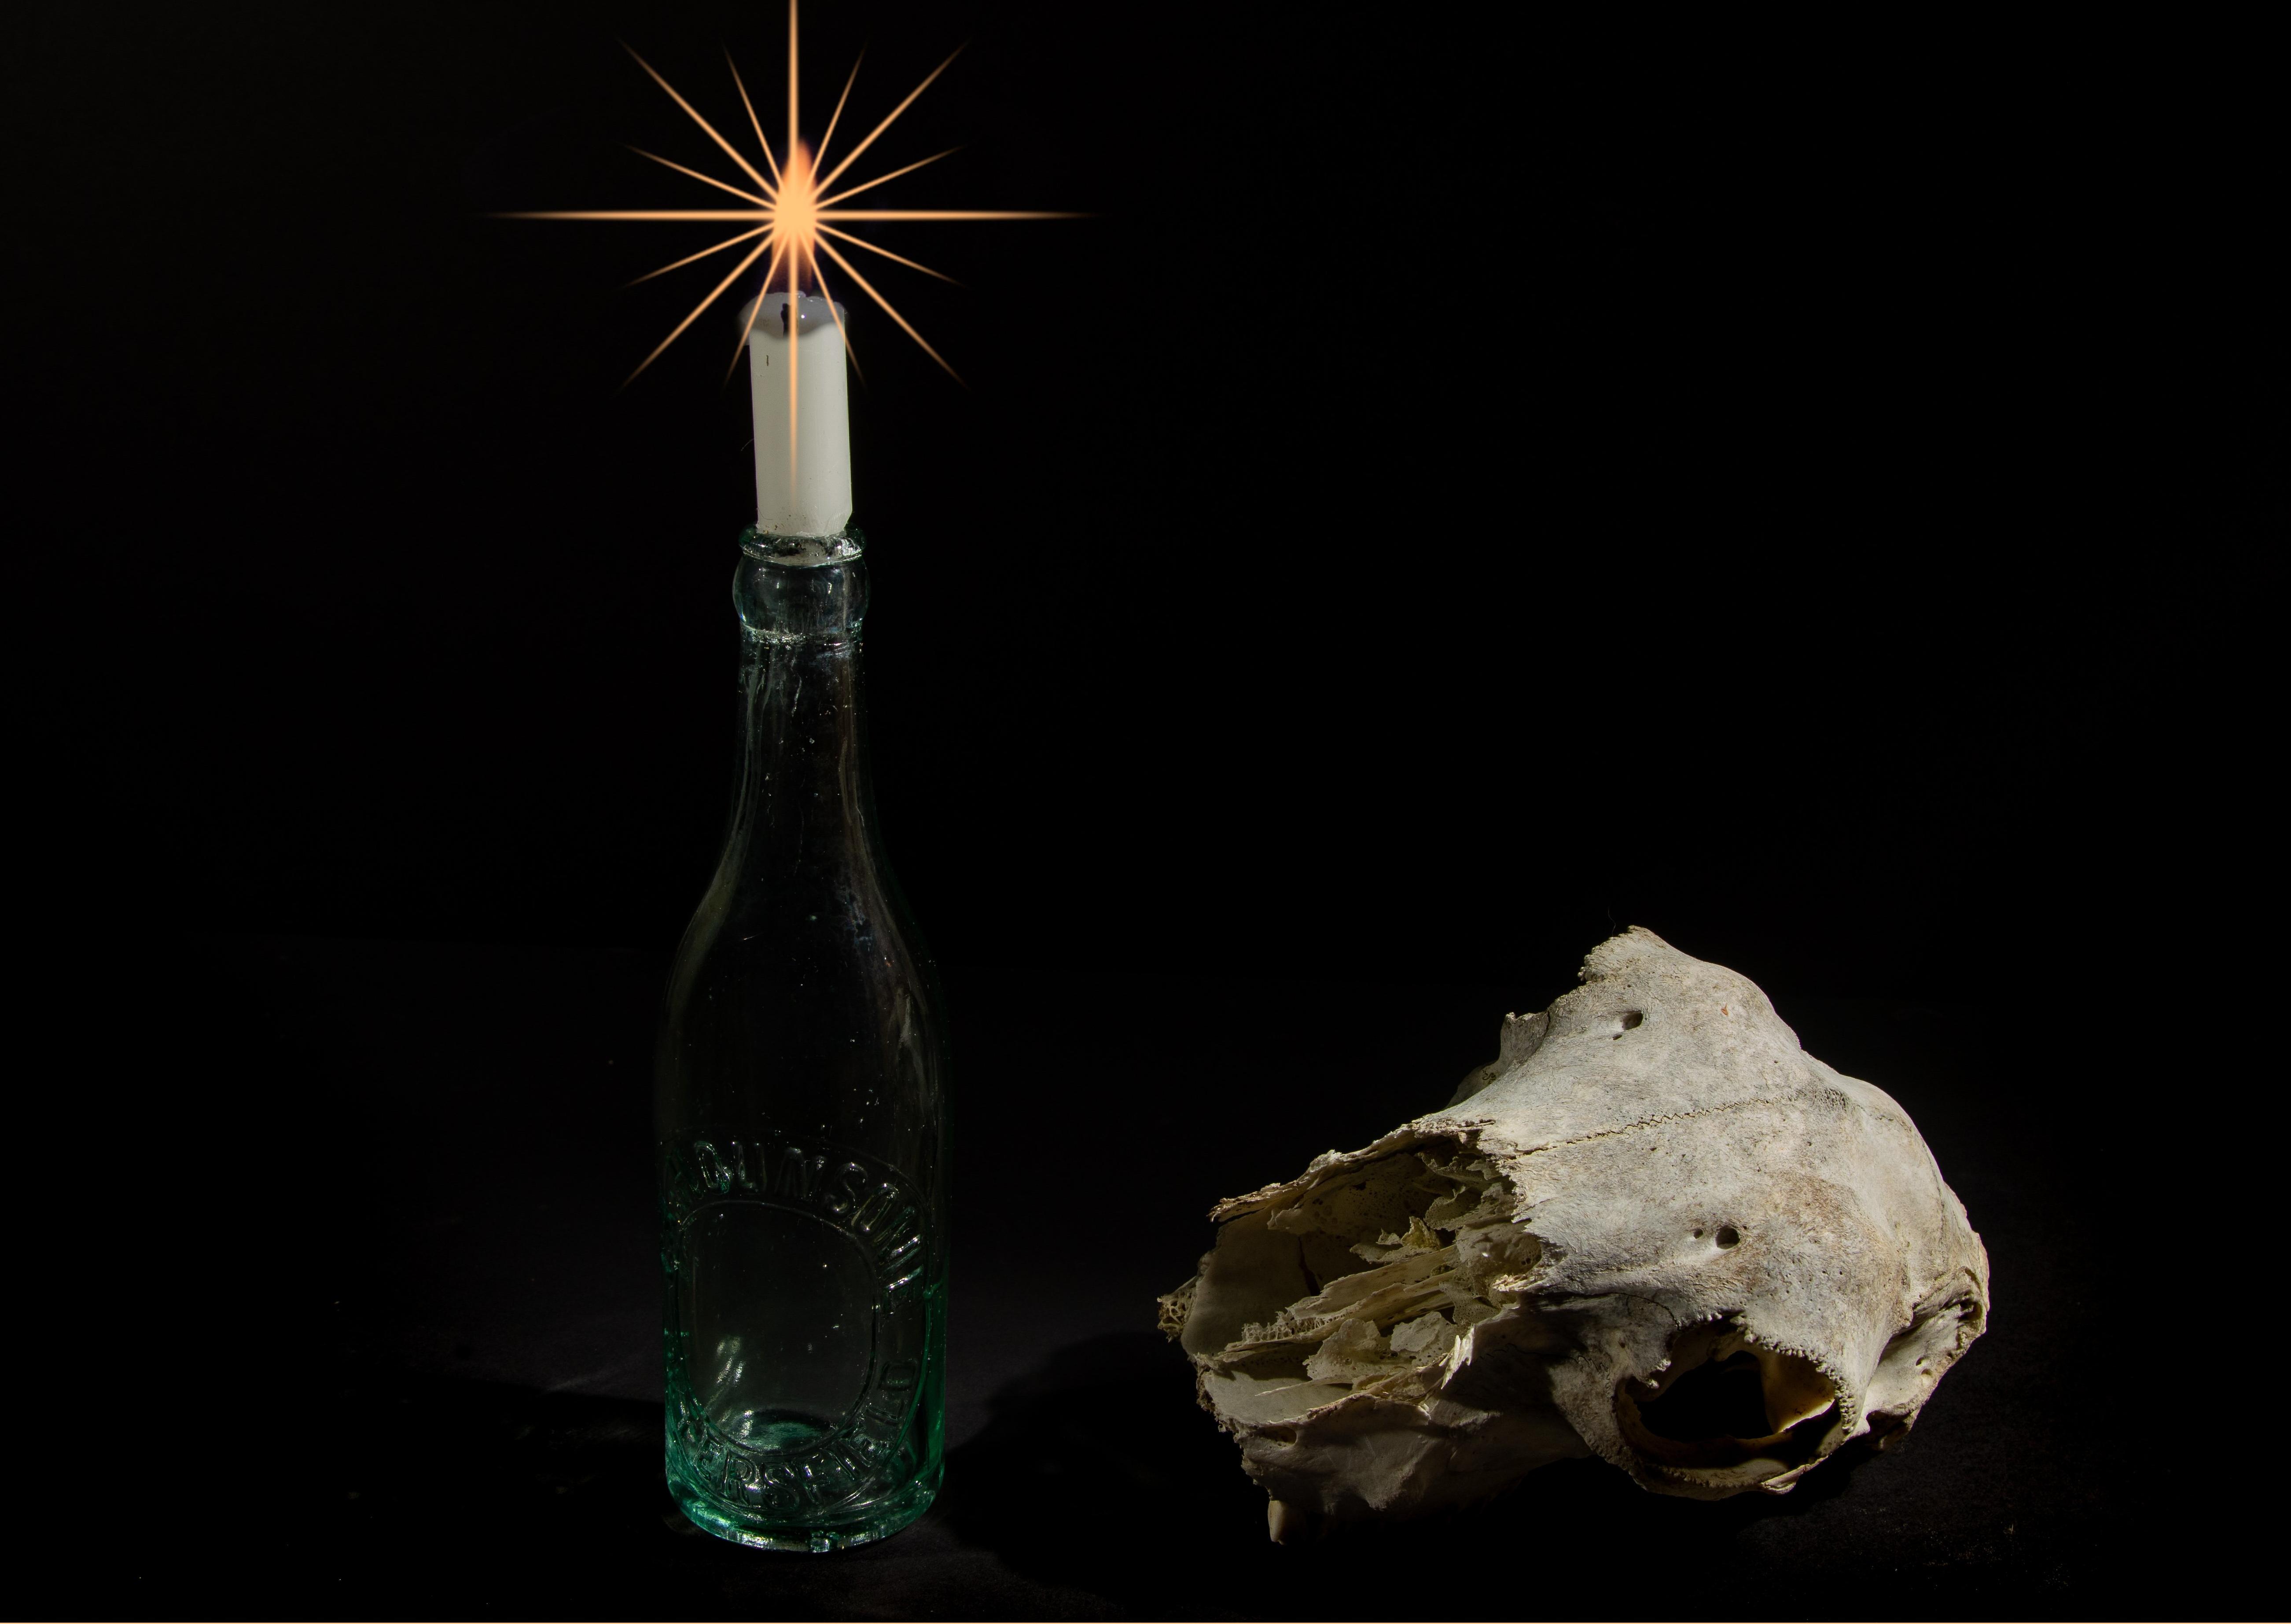 February – still life: Sheep’s Skull Bottle and Candle (after Picasso) by Janet Brown